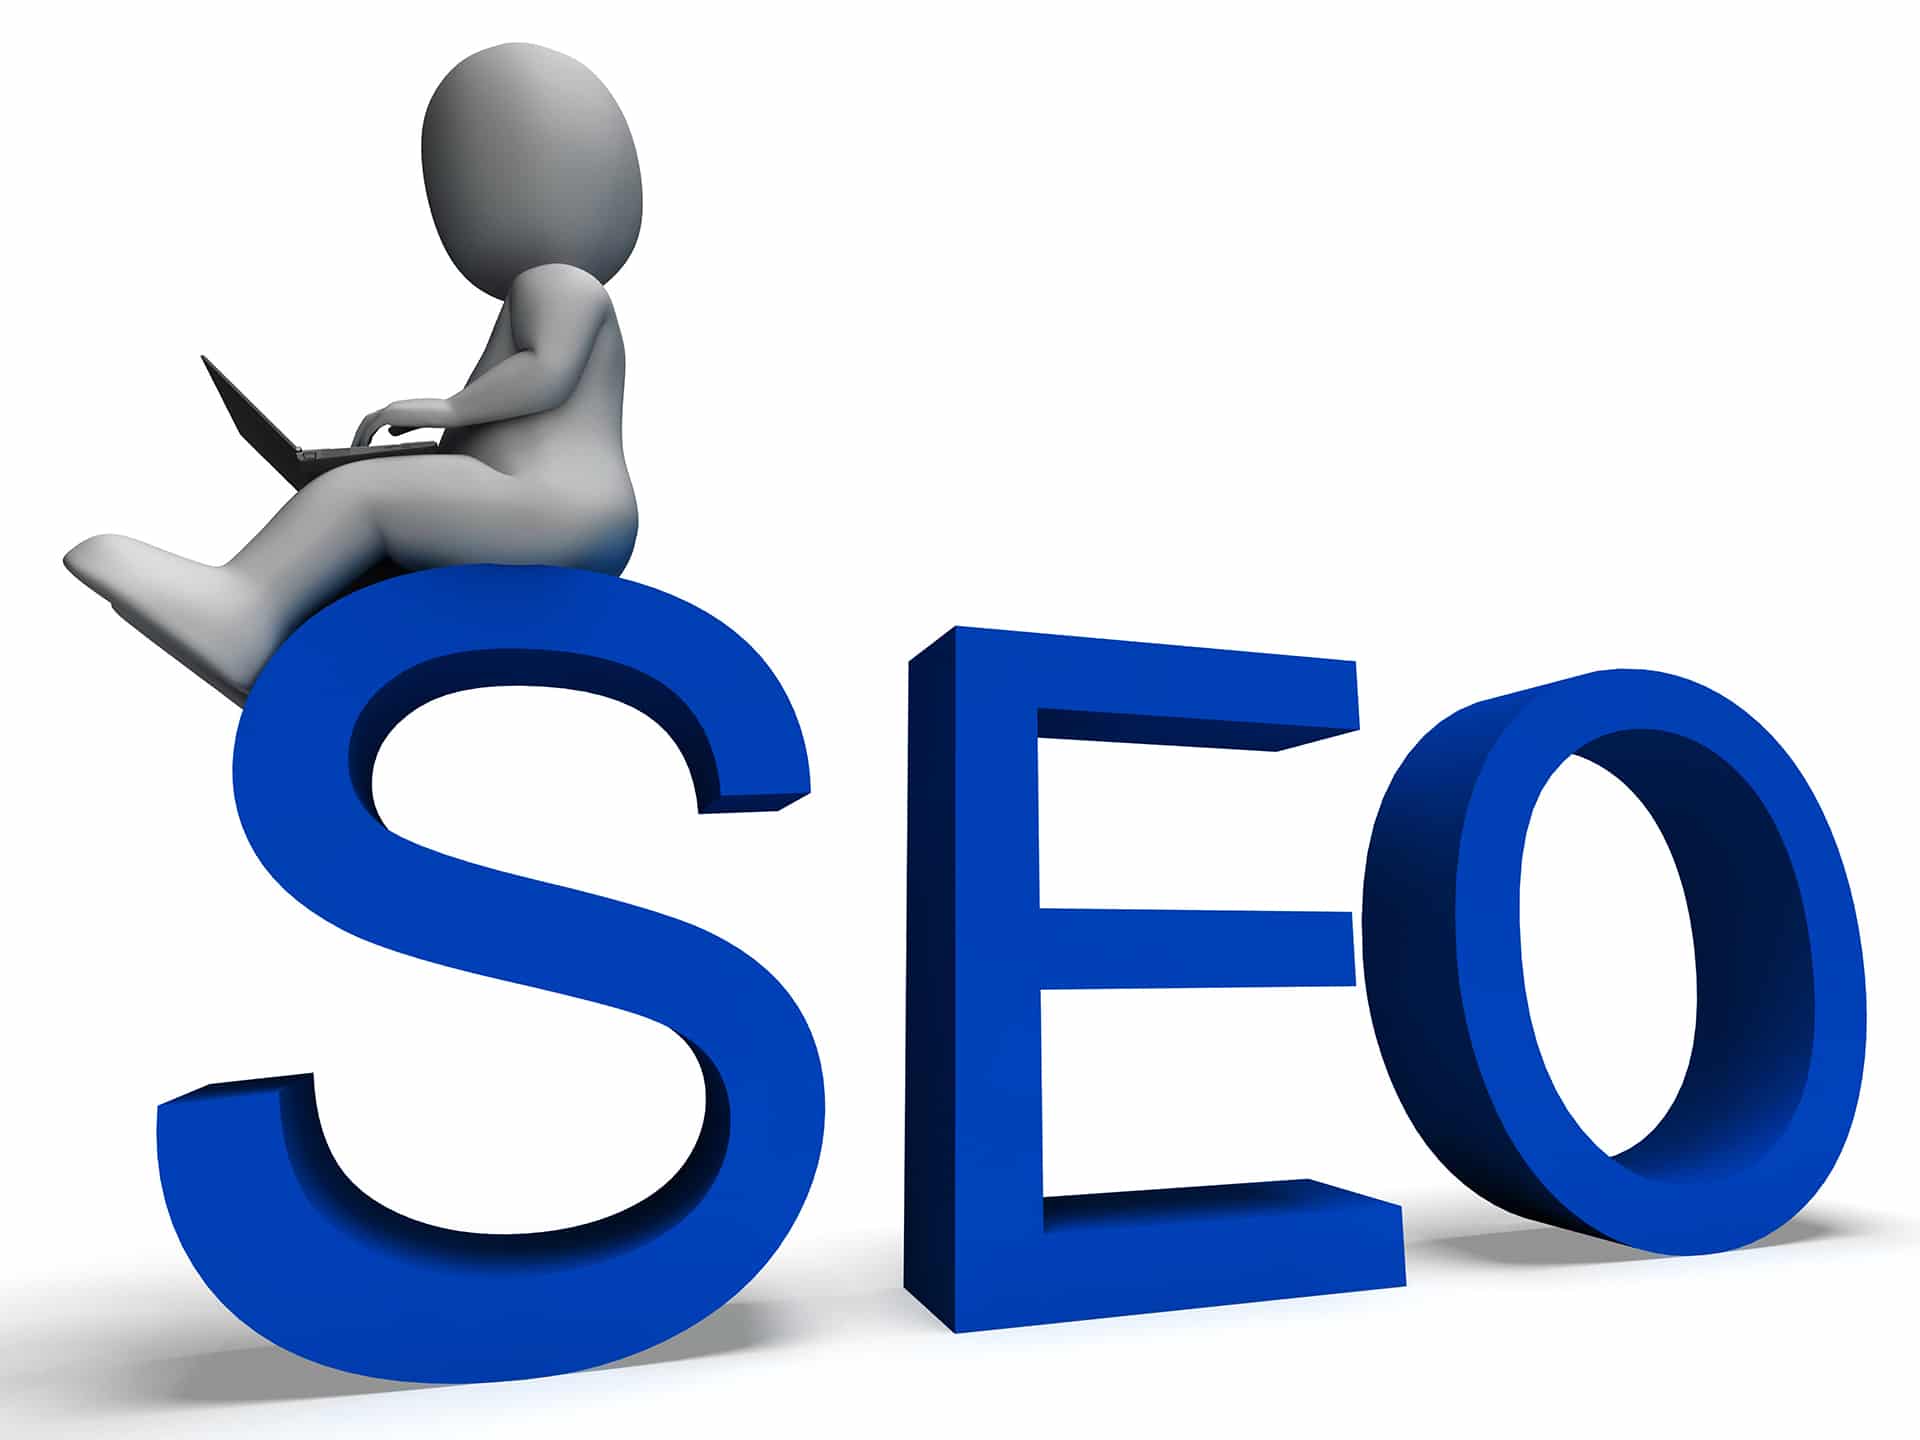 Best vSEO Company,Professional Video SEO Company,SEO Companies For Small Businesses,Page Rank,YouTube Marketing Expert,Best SEO Video Business,SEO Video Experts